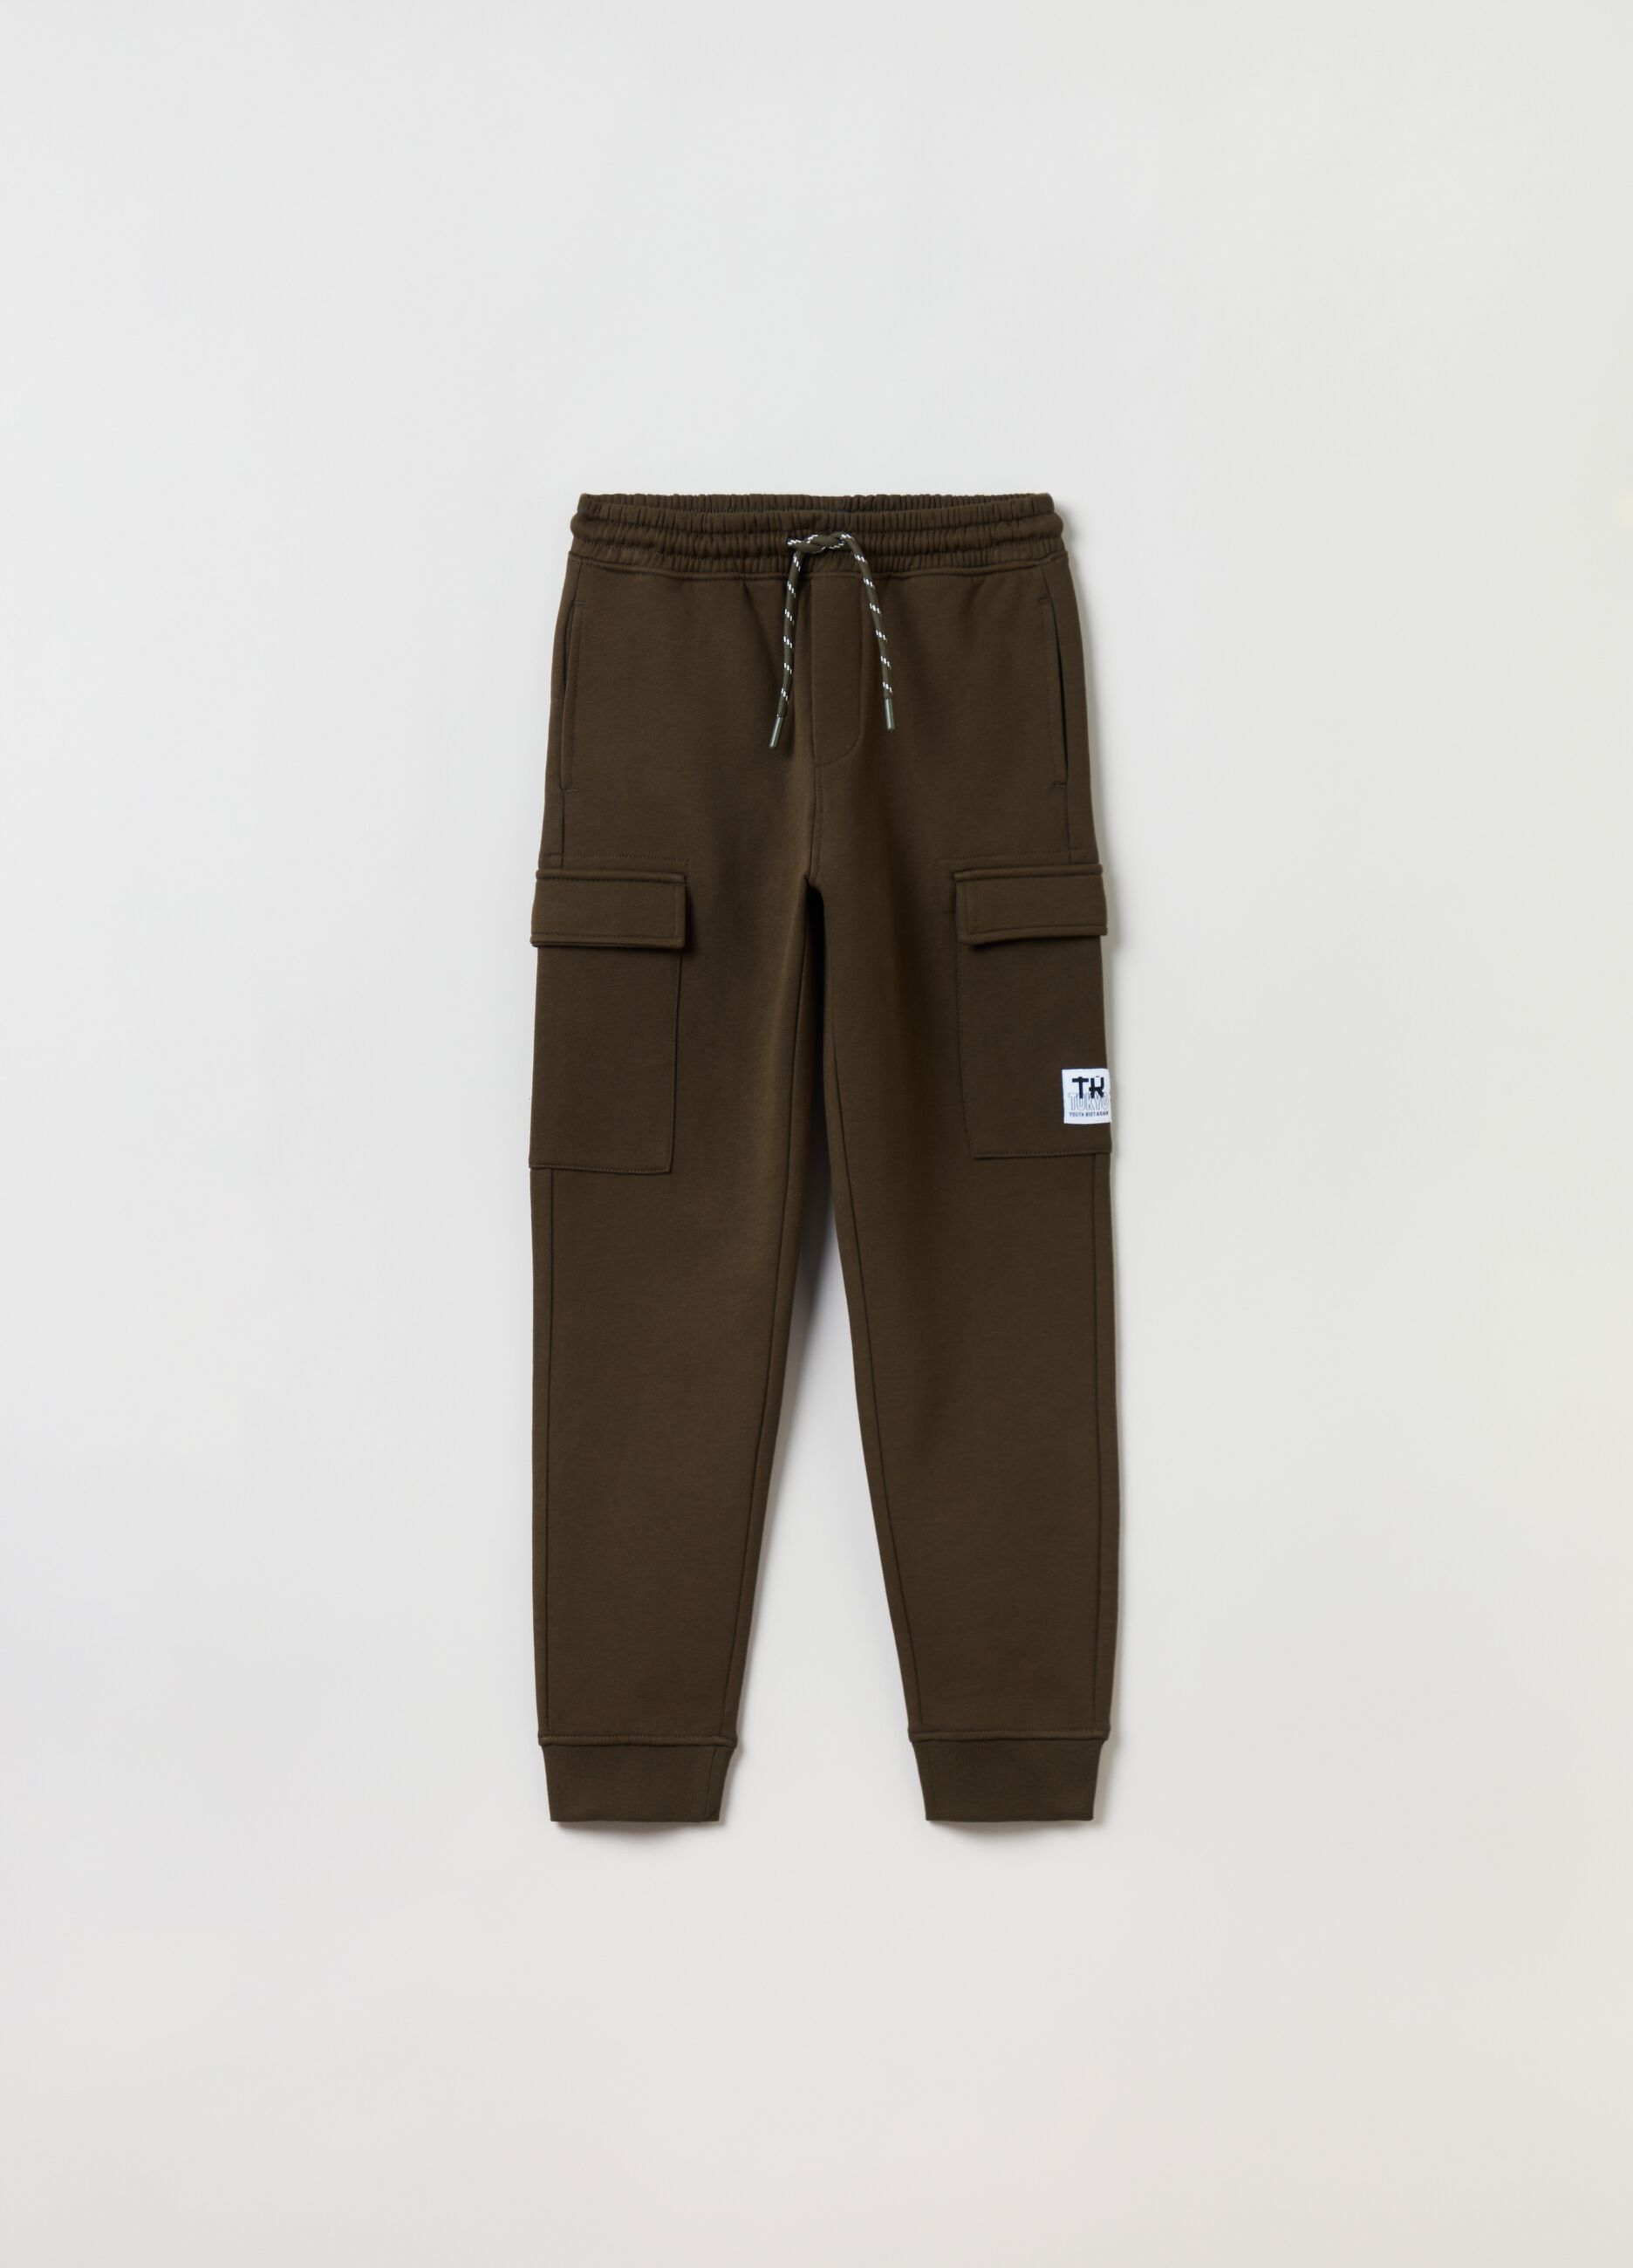 Tokyo Youth Riot Again cargo joggers_0